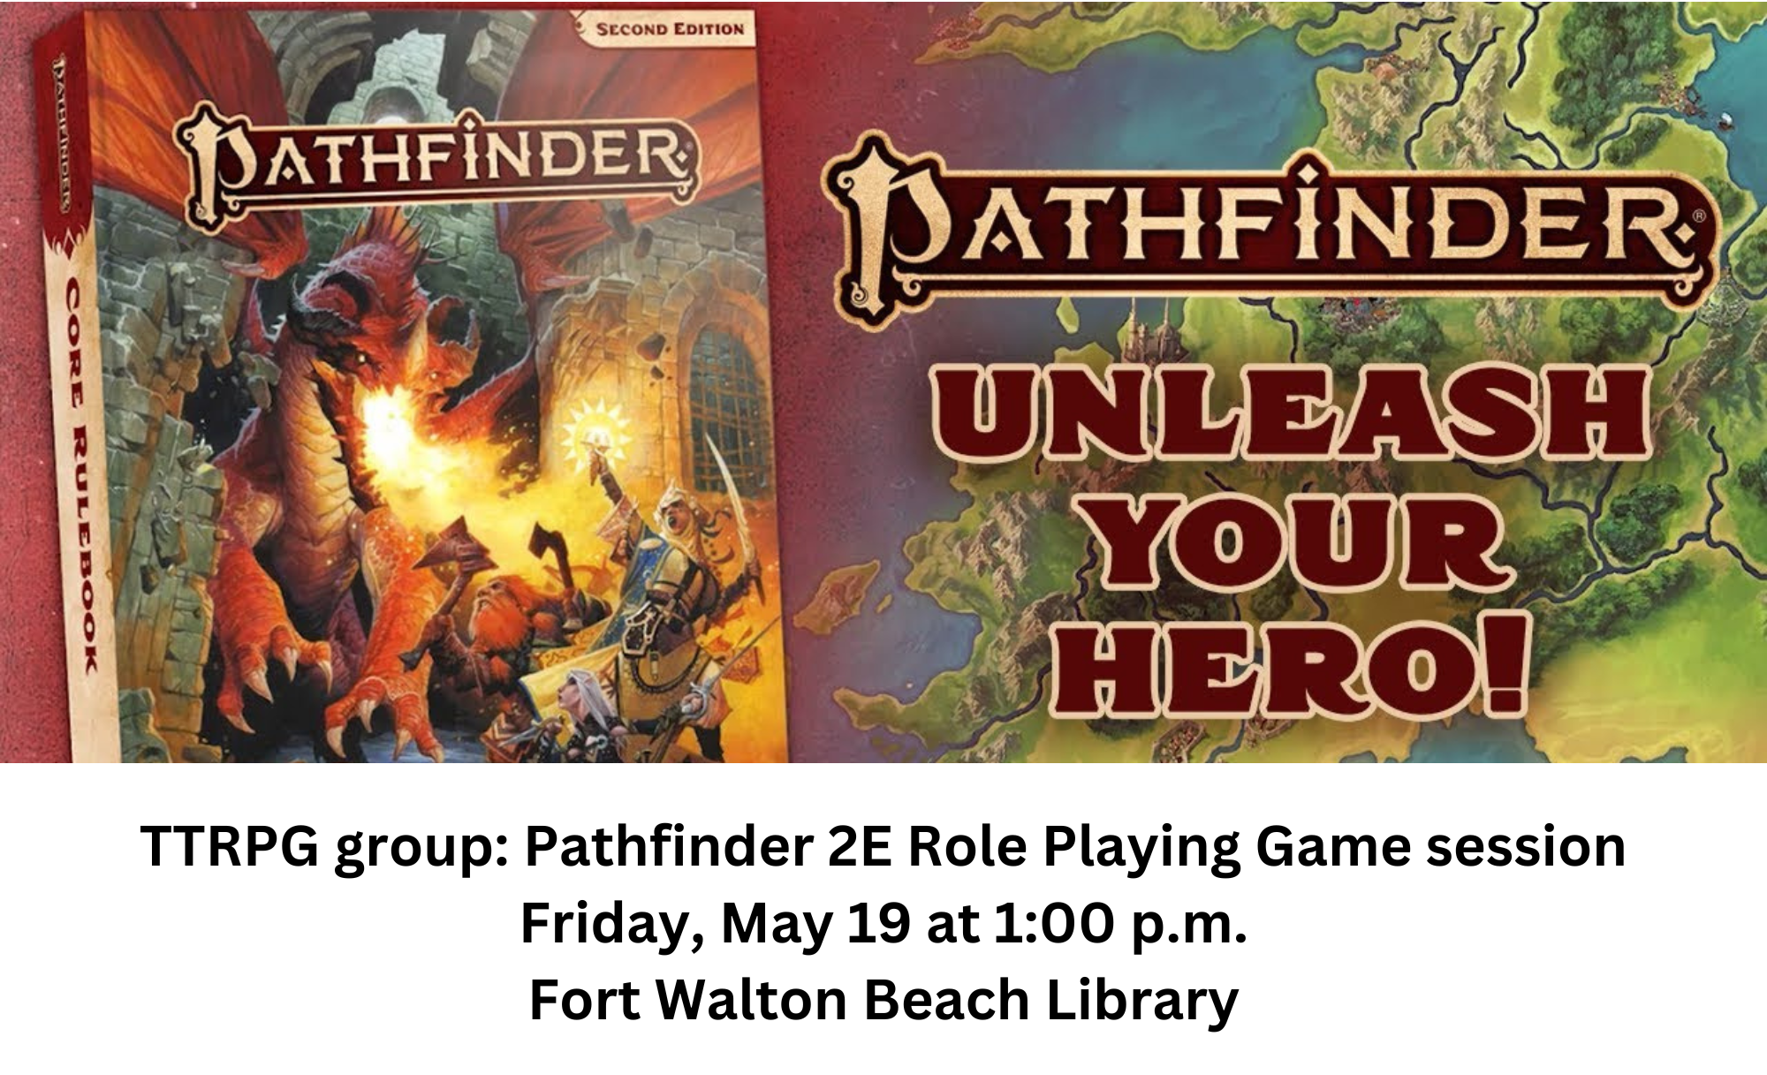 Tabletop Role-playing Gaming group - Pathfinder 2E